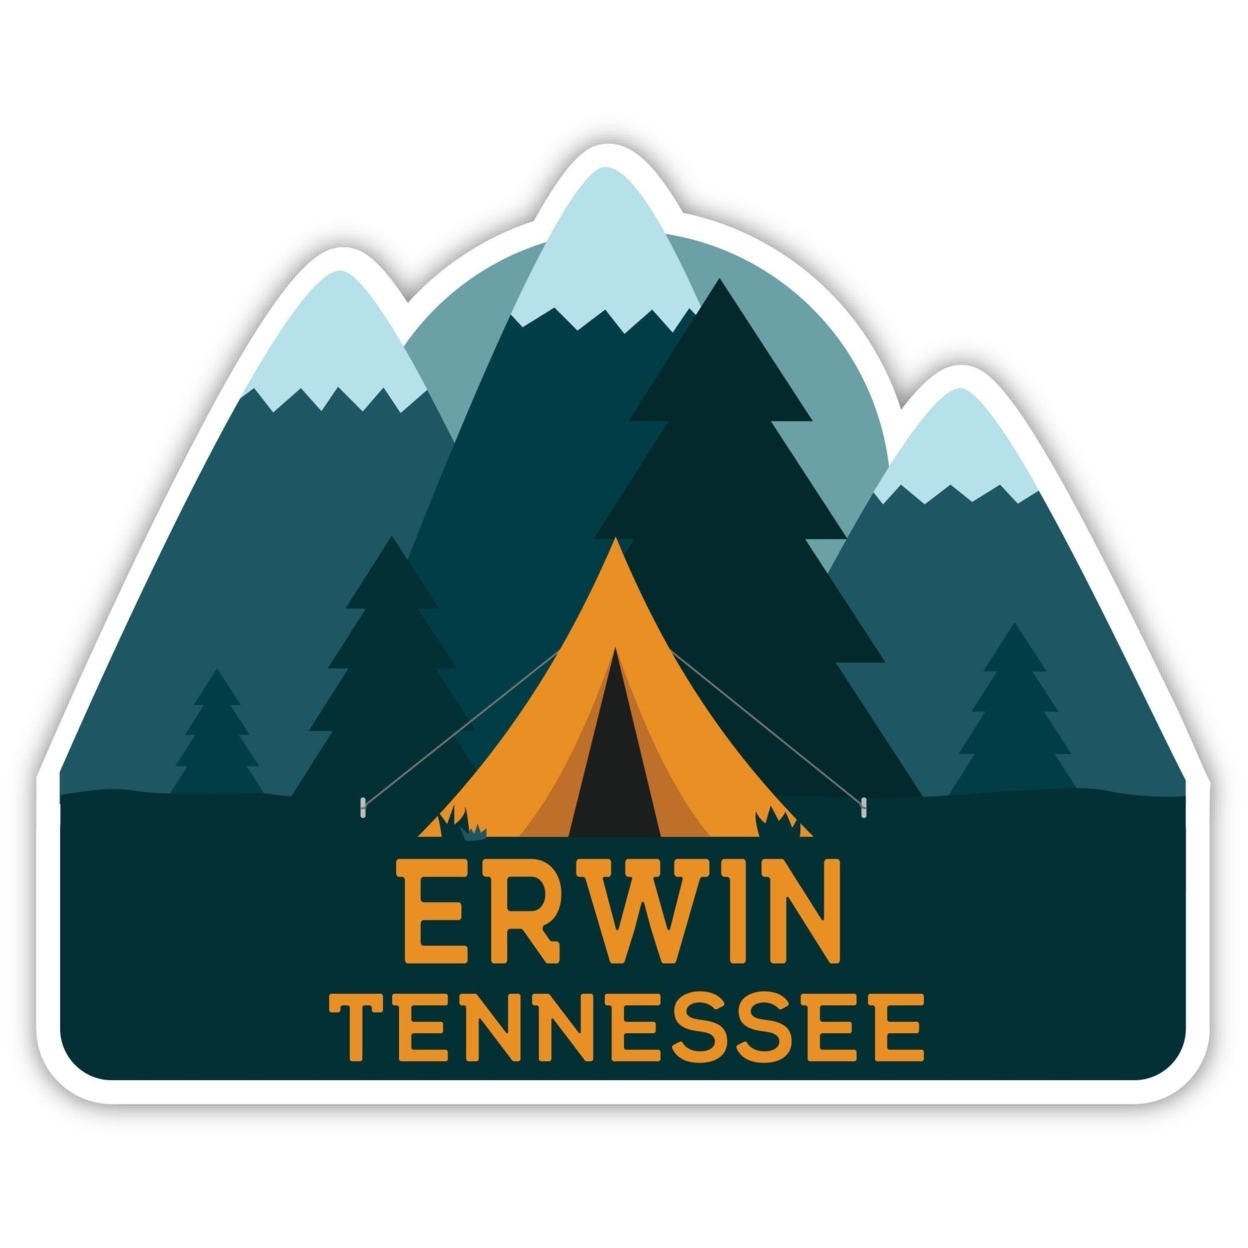 Erwin Tennessee Souvenir Decorative Stickers (Choose Theme And Size) - Single Unit, 2-Inch, Tent